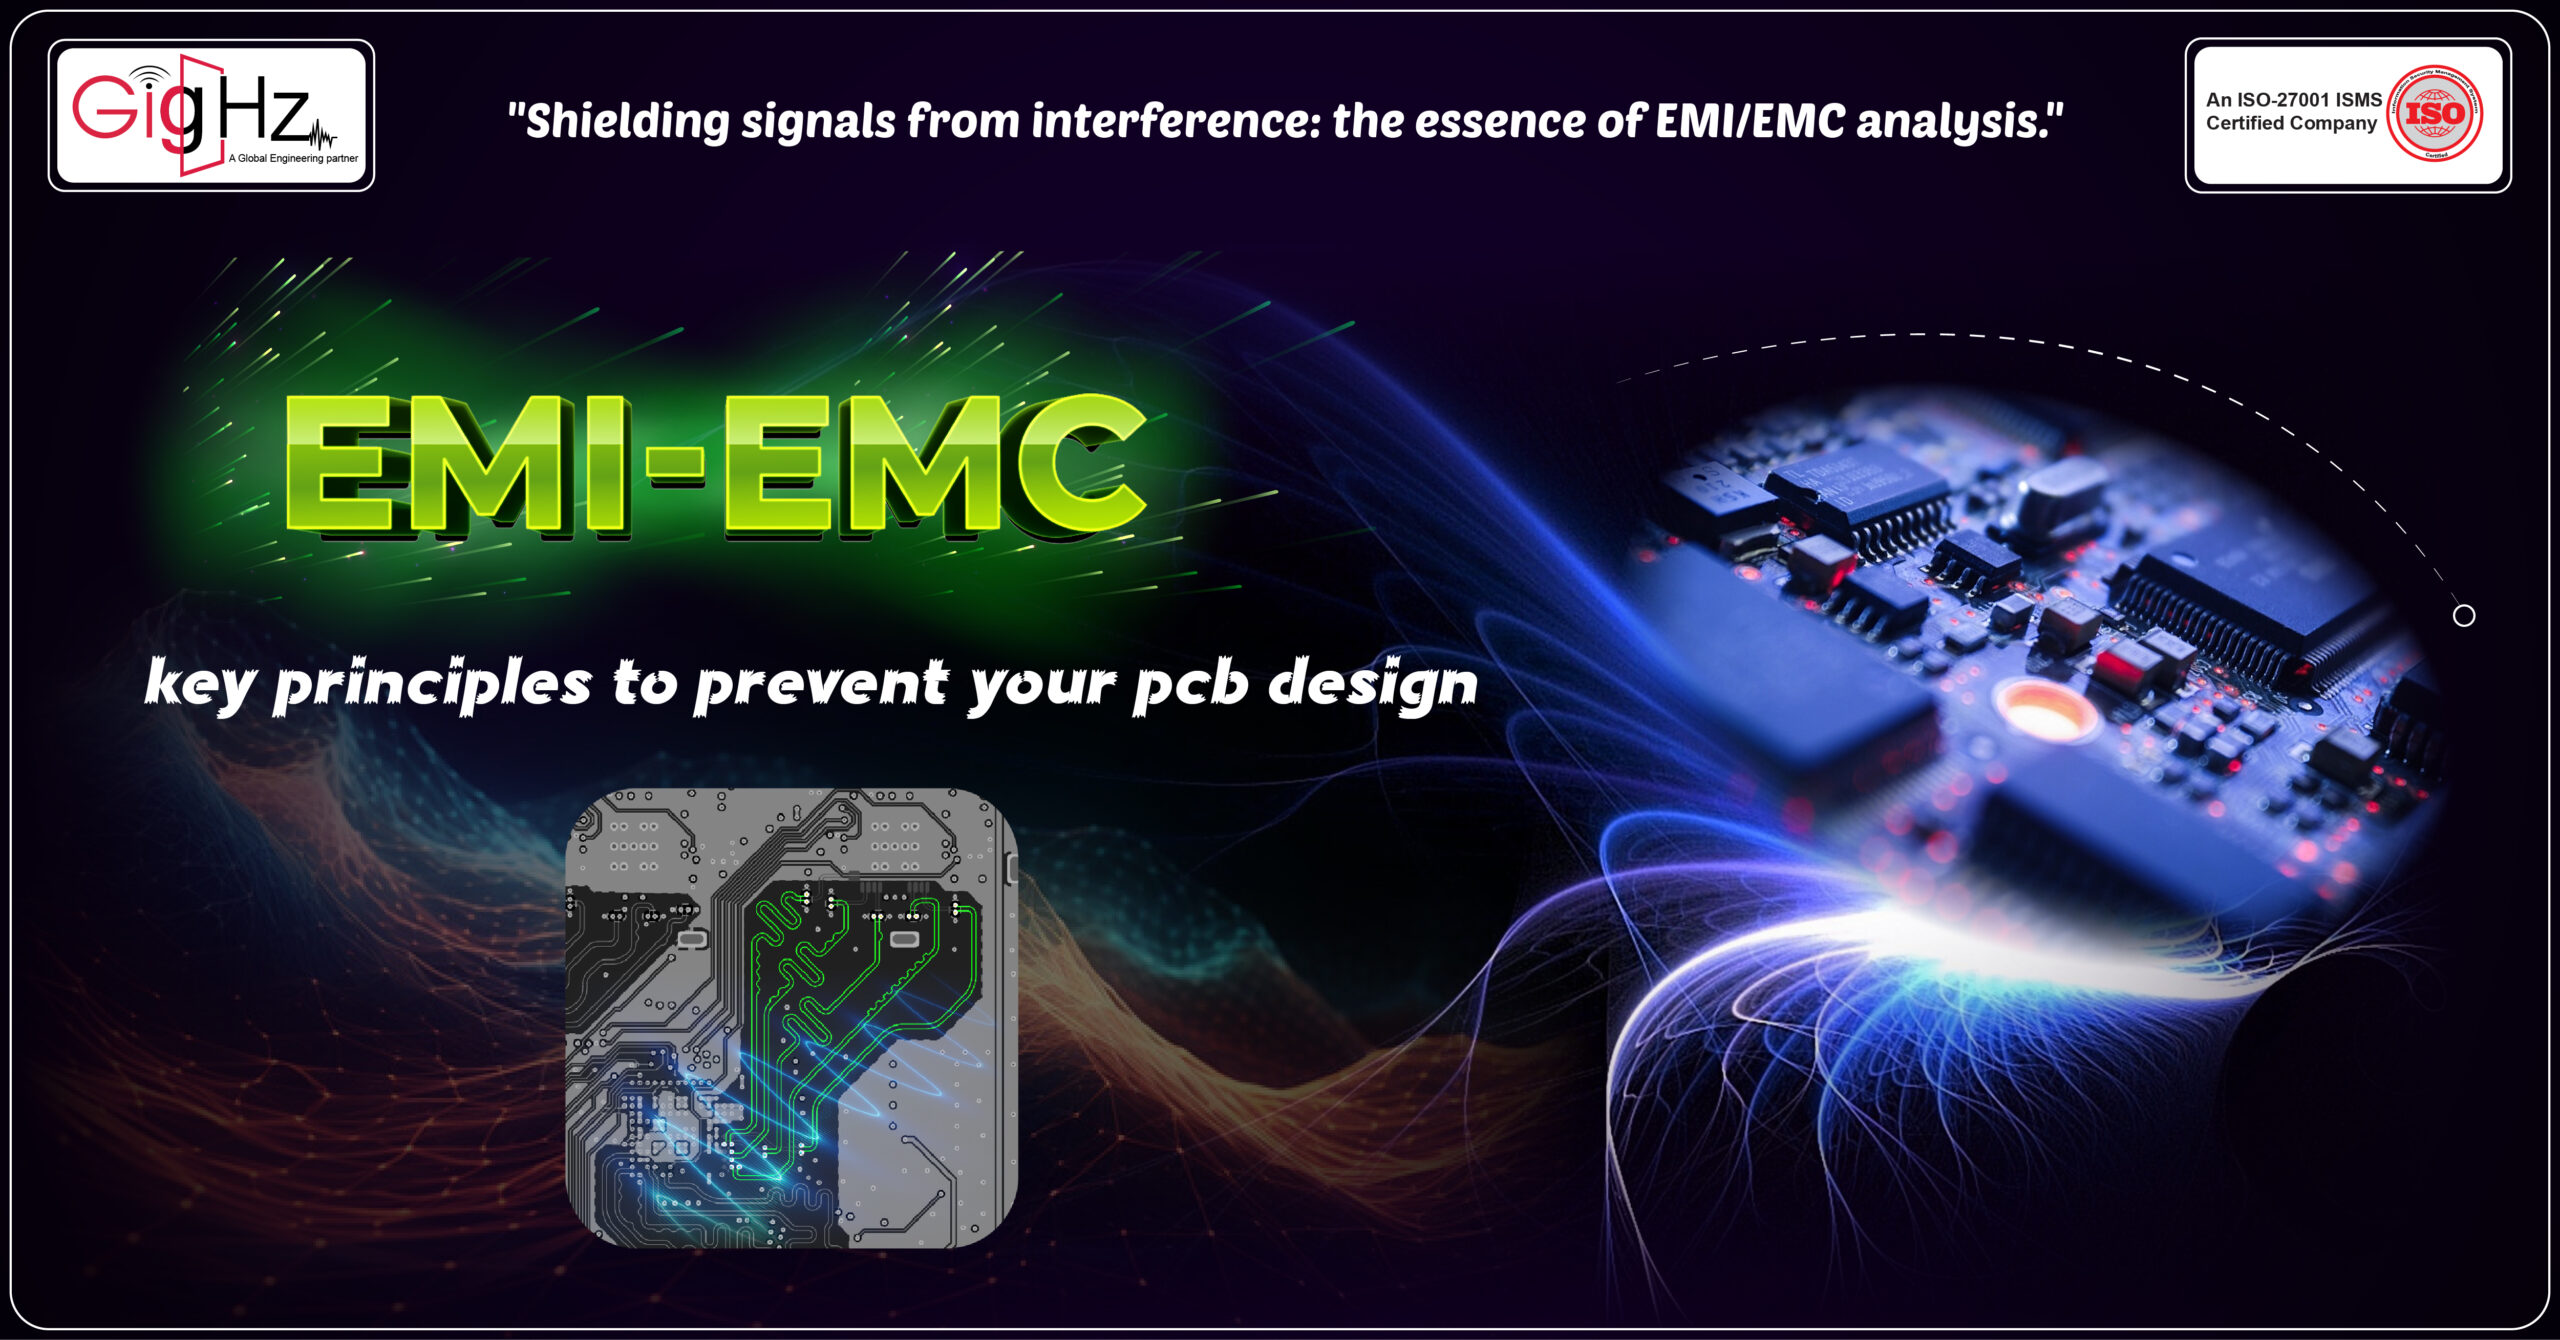 Follow these emi emc principles to prevent your pcb design